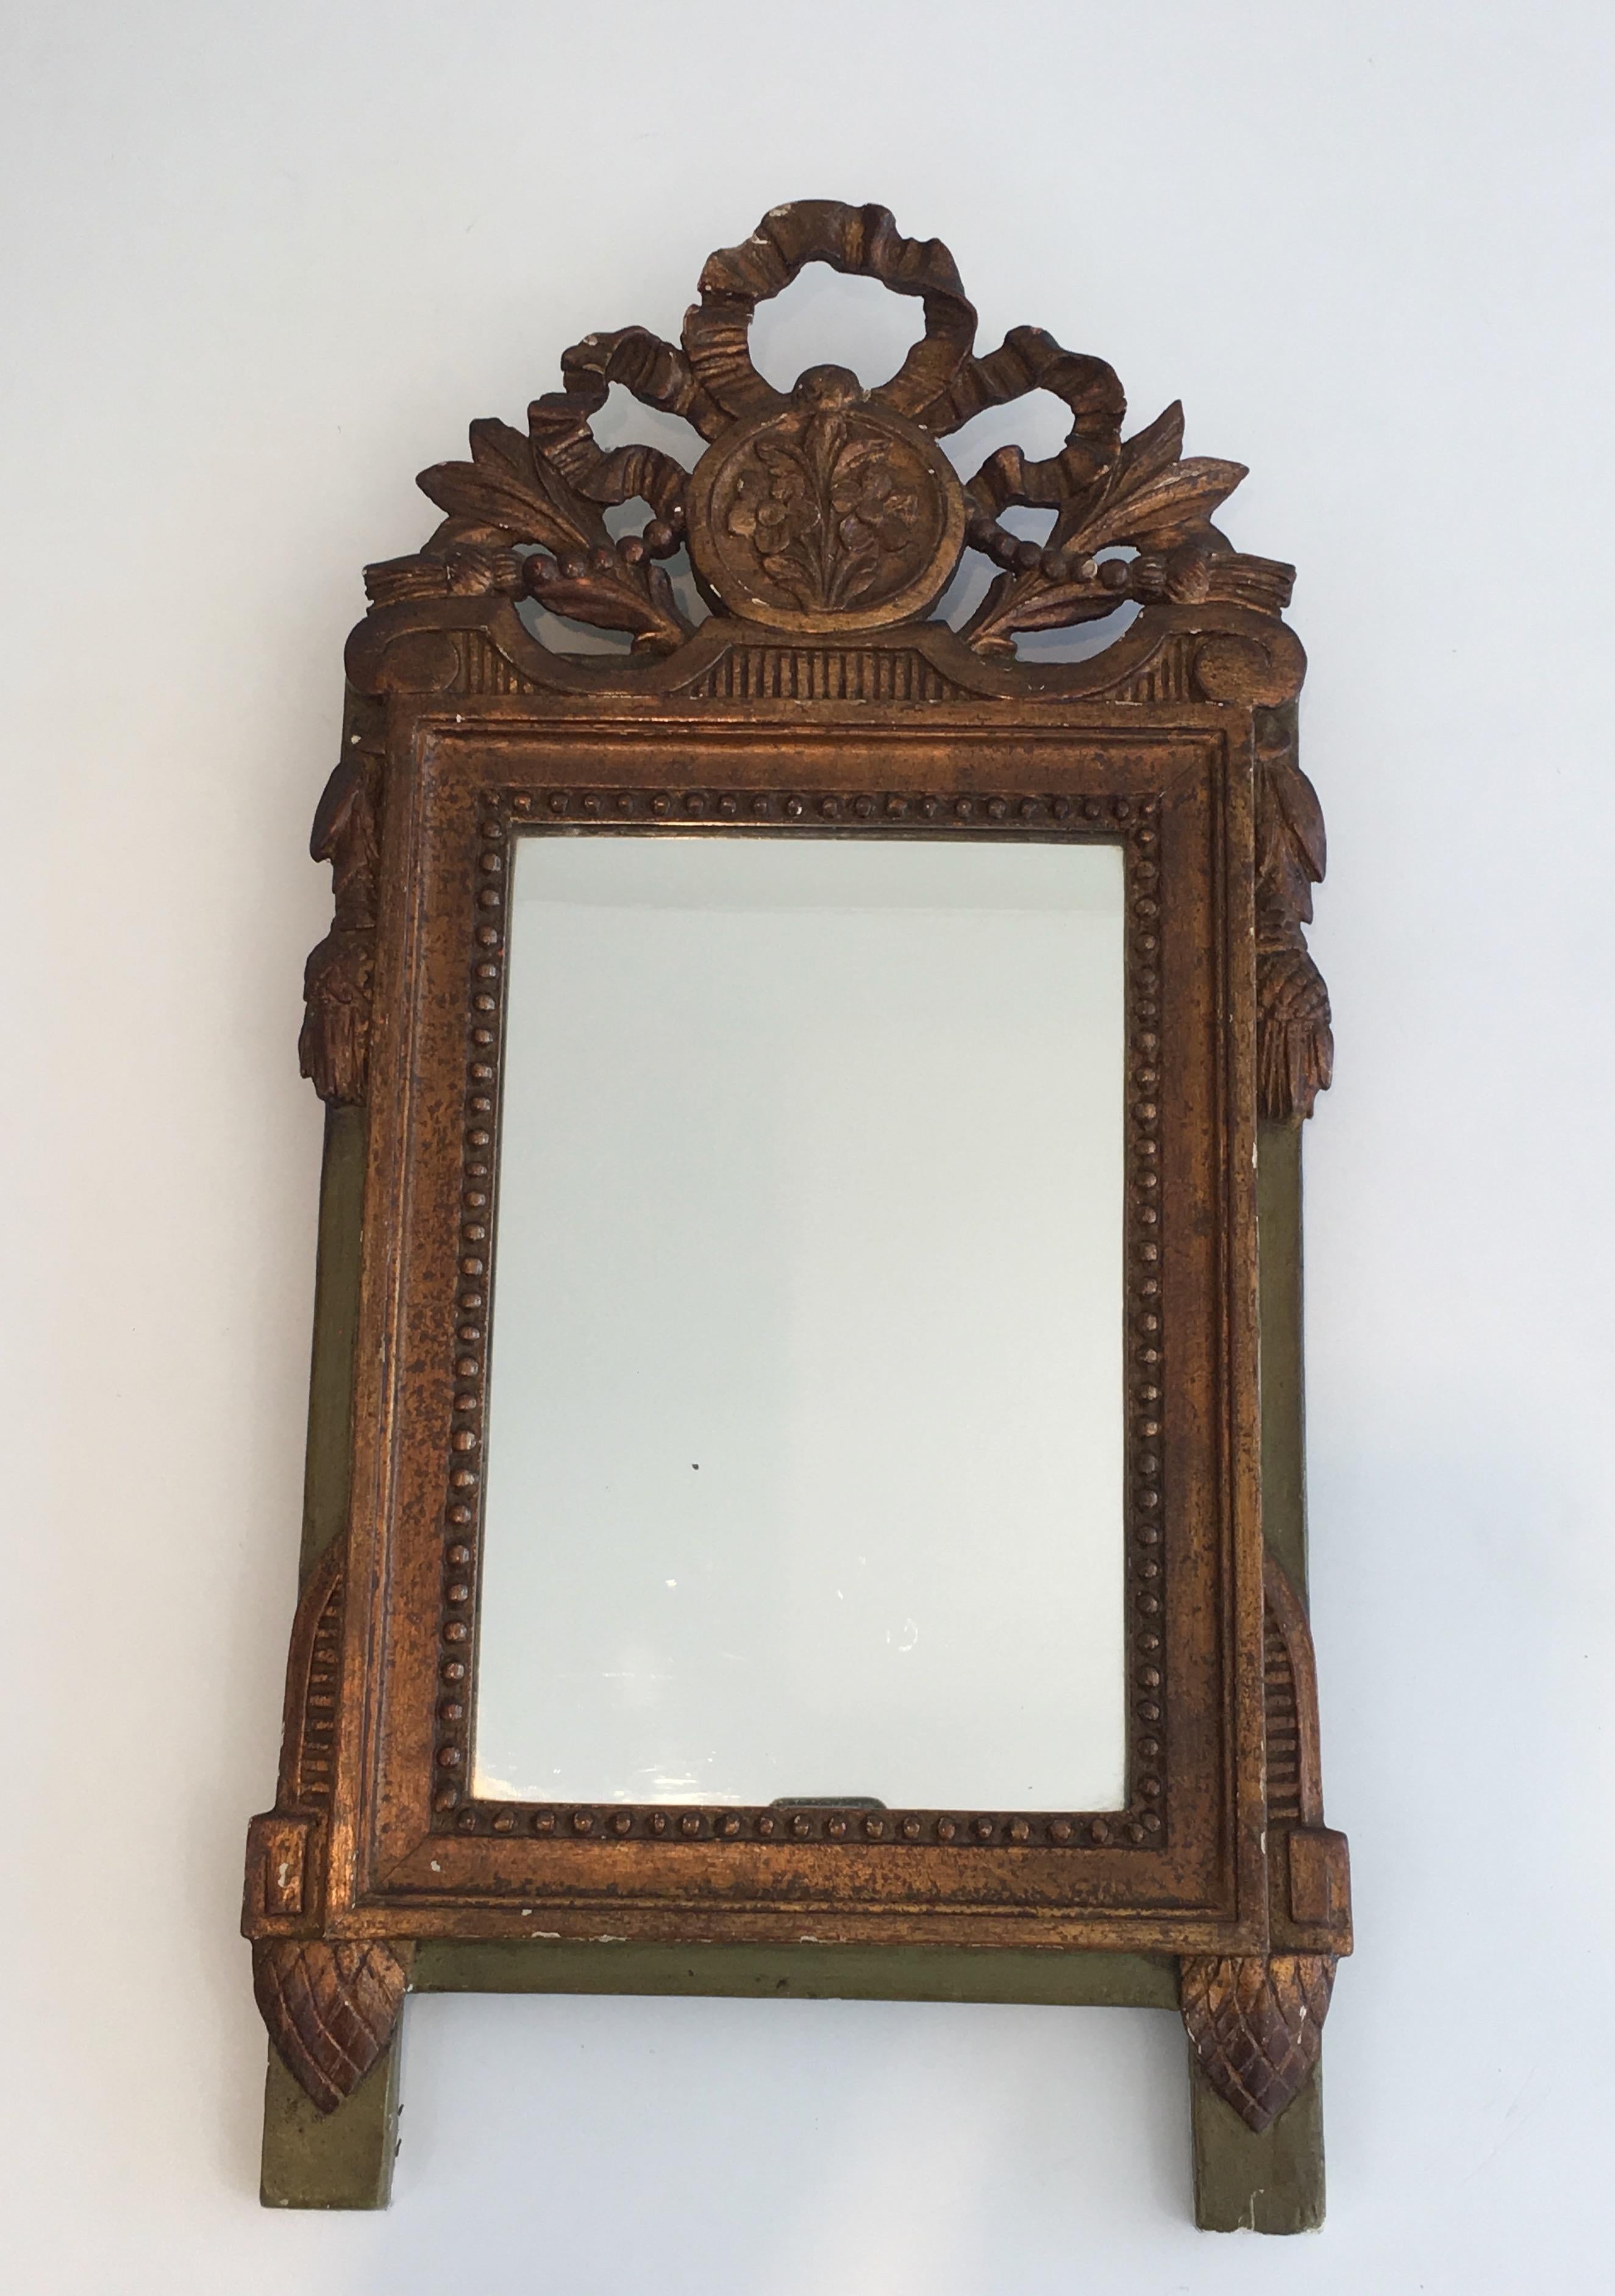 Louis the xvi Style Gilt and Painted Wood Mirror, French, 19th Century For Sale 15